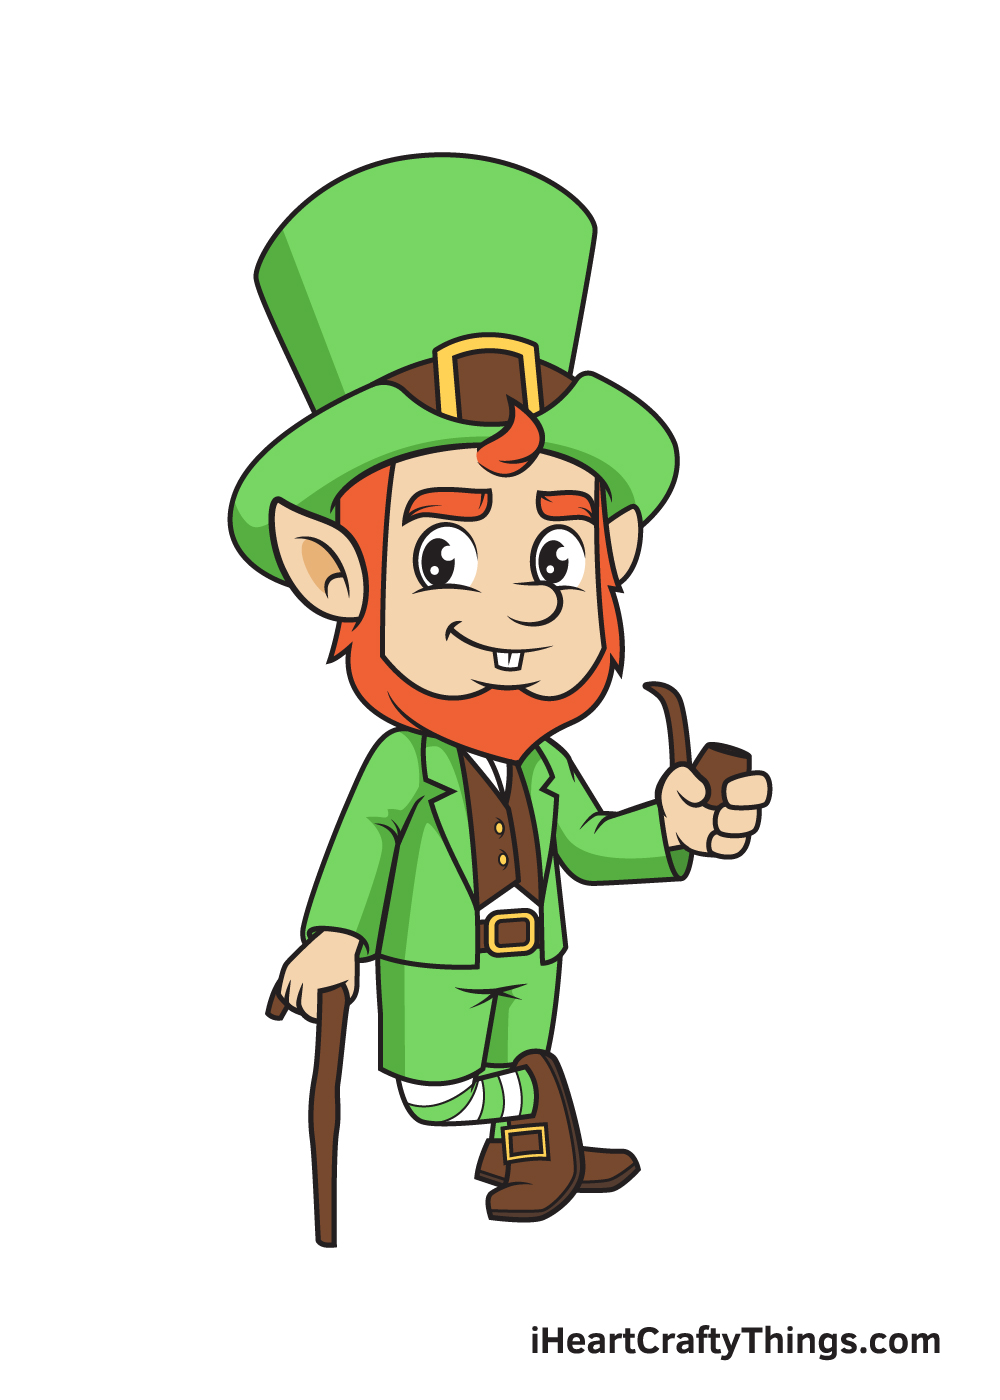 Leprechaun Drawing - How To Draw A Step By.